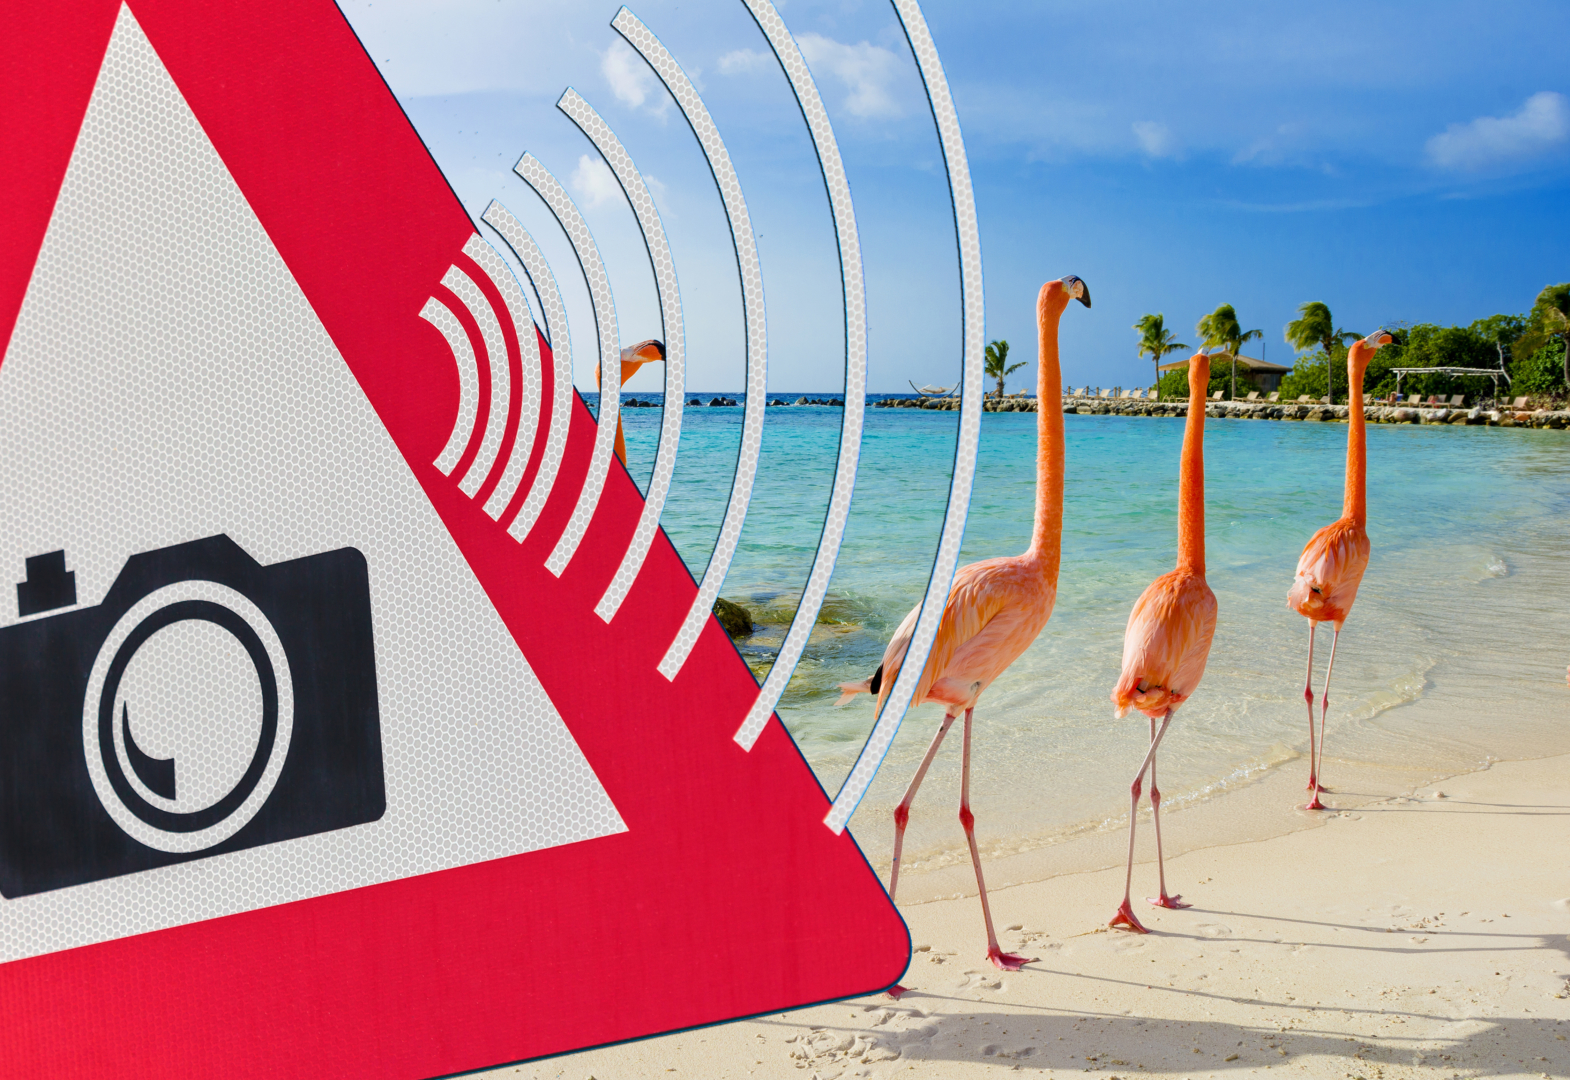 Traffic Ordinance Bonaire for our national bird?